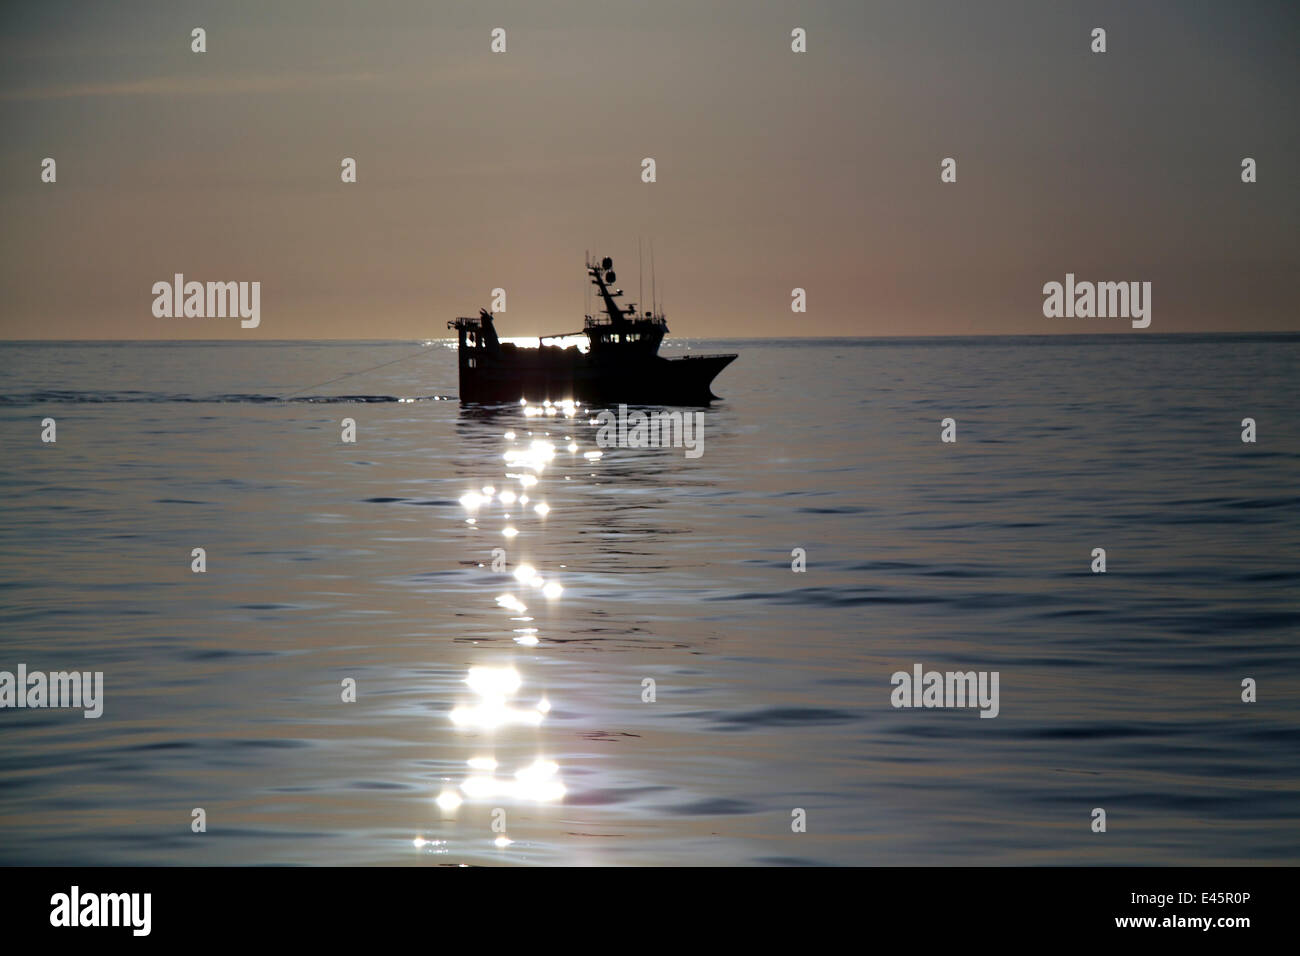 Trawling on the North Sea in flat calm conditions, May 2010. Property released. Stock Photo